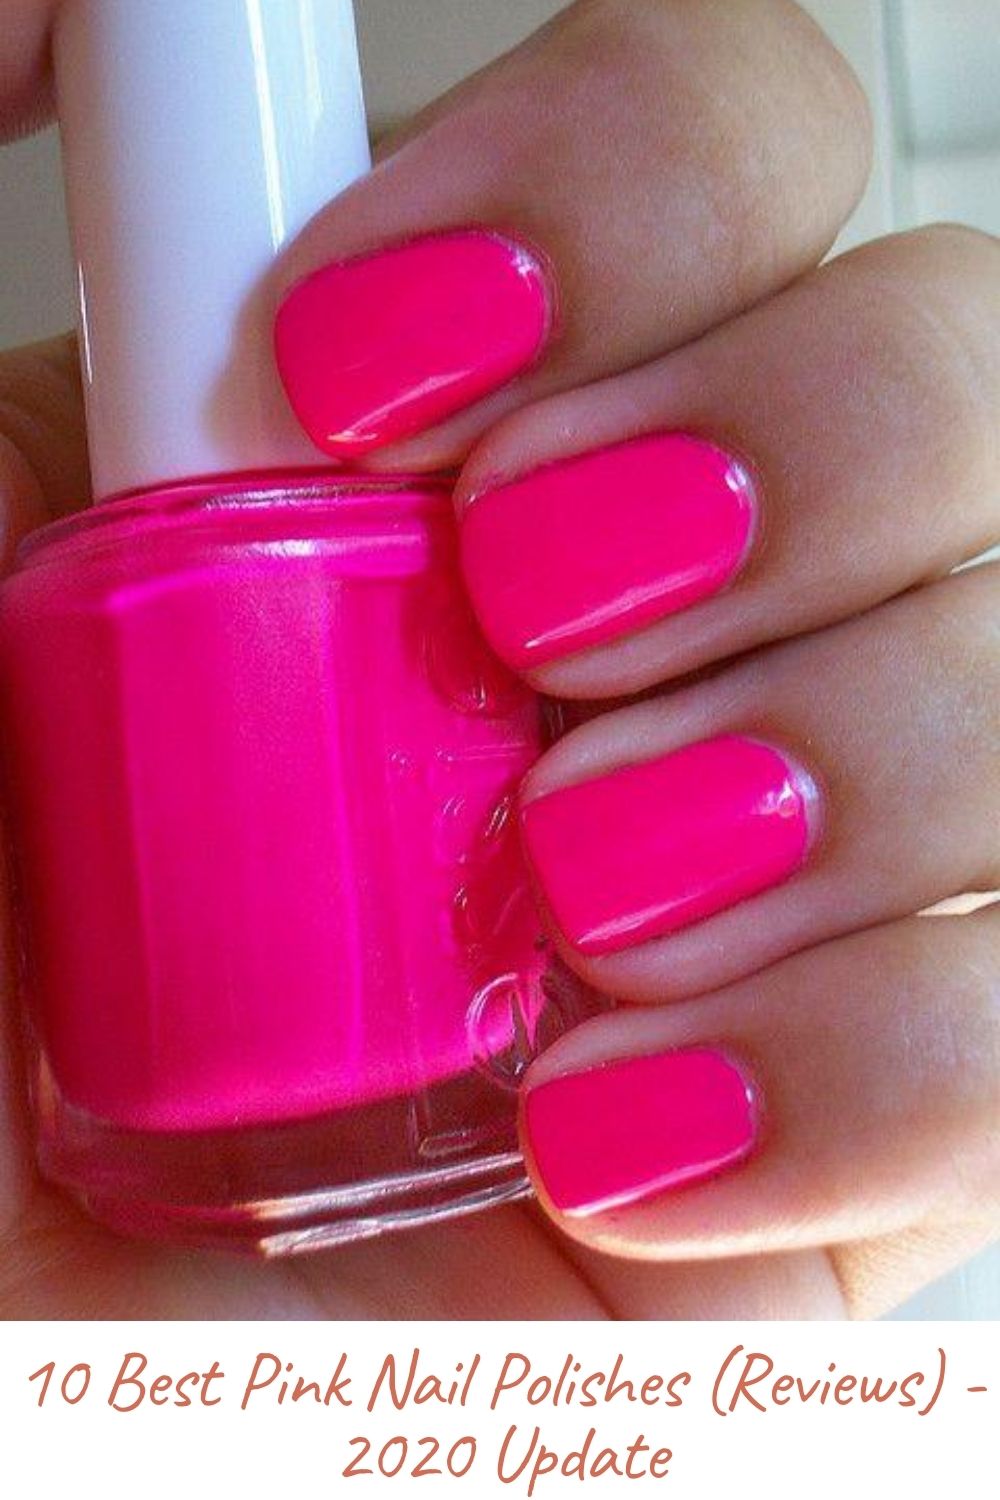 10 Best Pink Nail Polishes (Reviews) 2020 Update